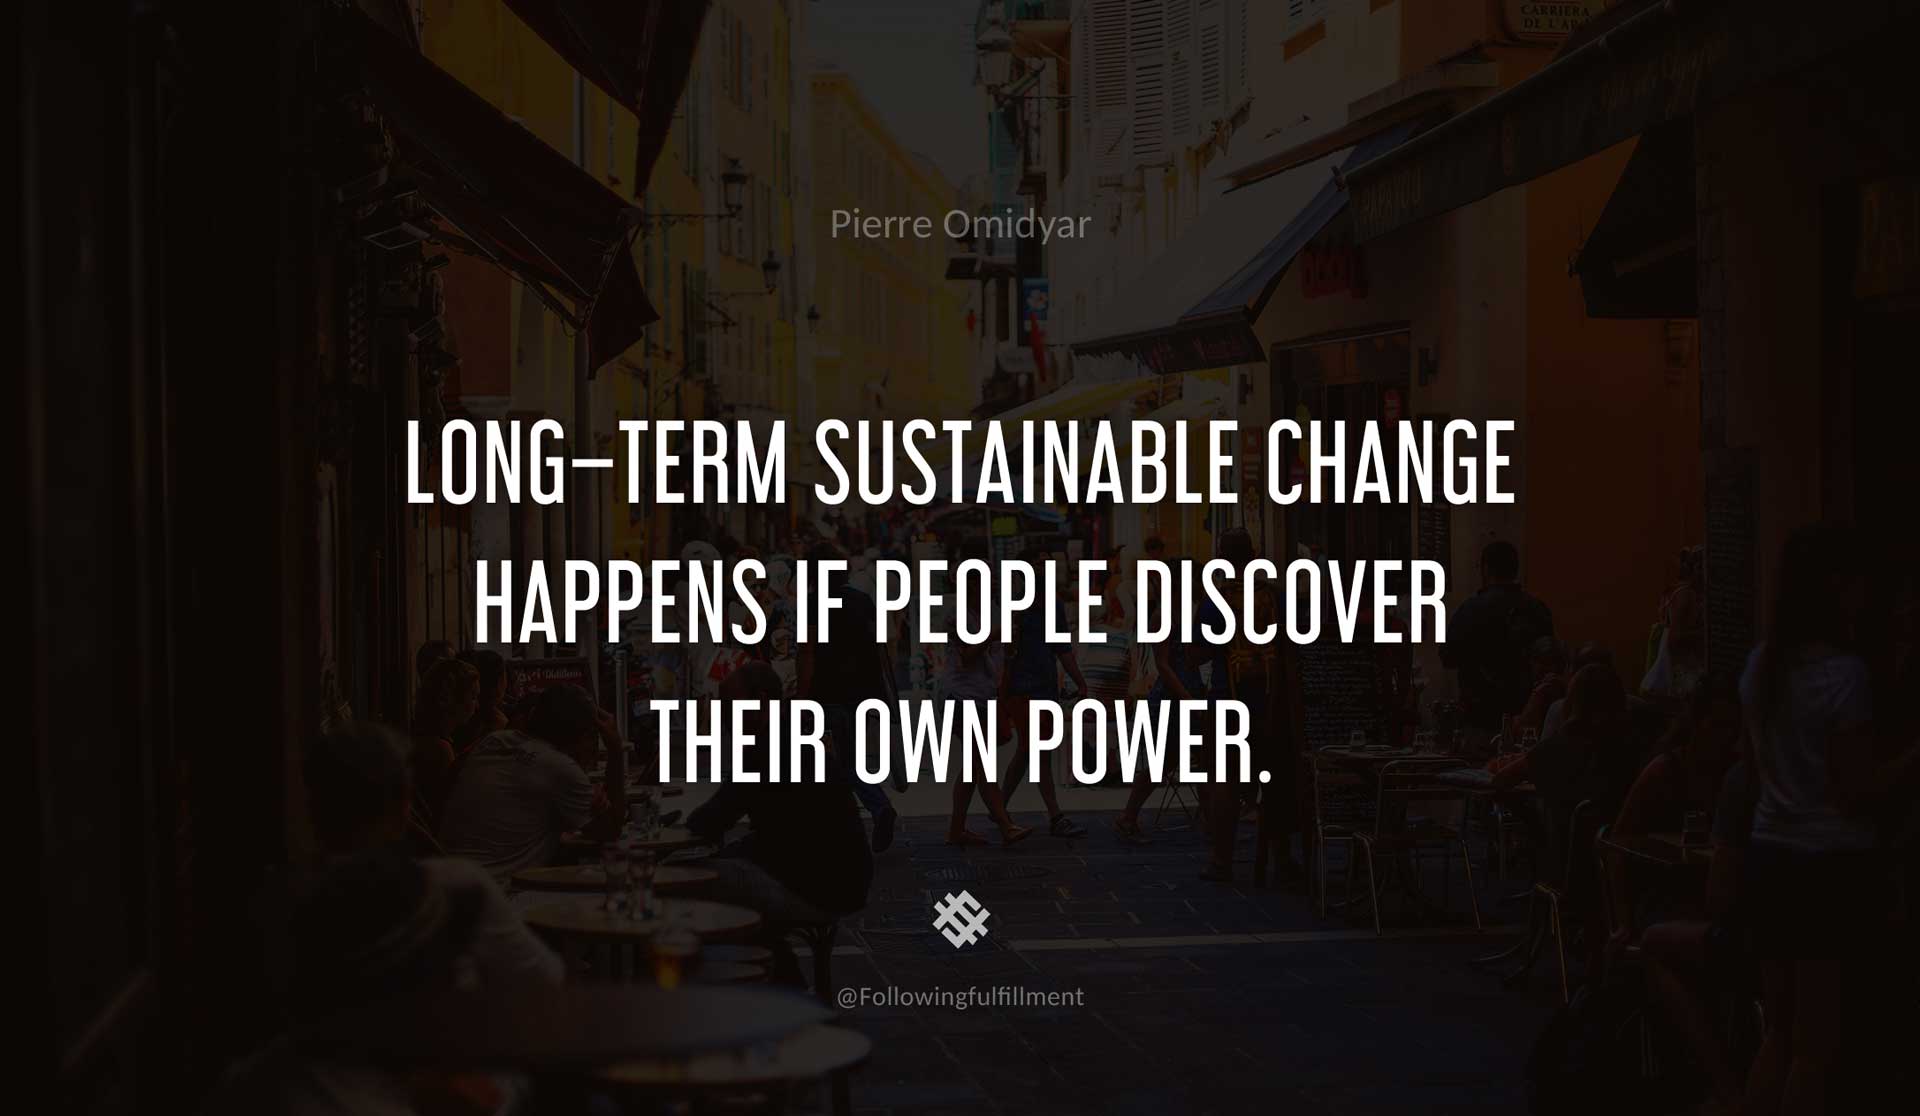 Long-term-sustainable-change-happens-if-people-discover-their-own-power.--PIERRE-OMIDYAR-Quote.jpg